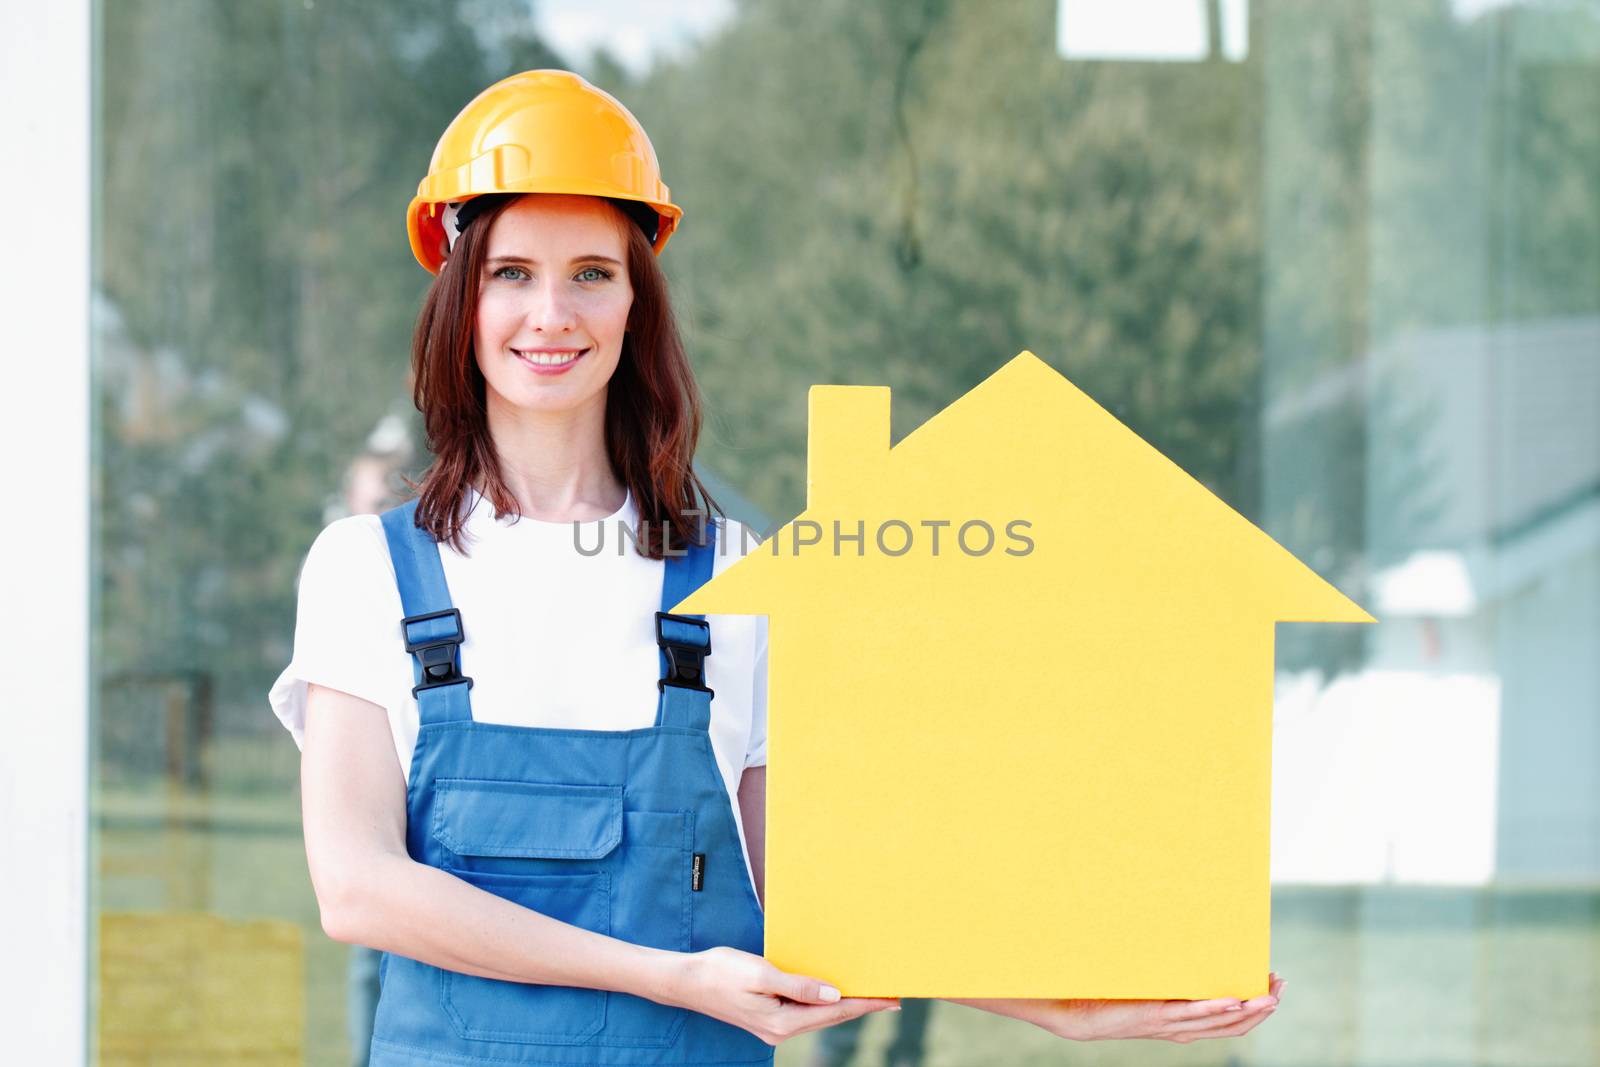 workman and yellow house symbol